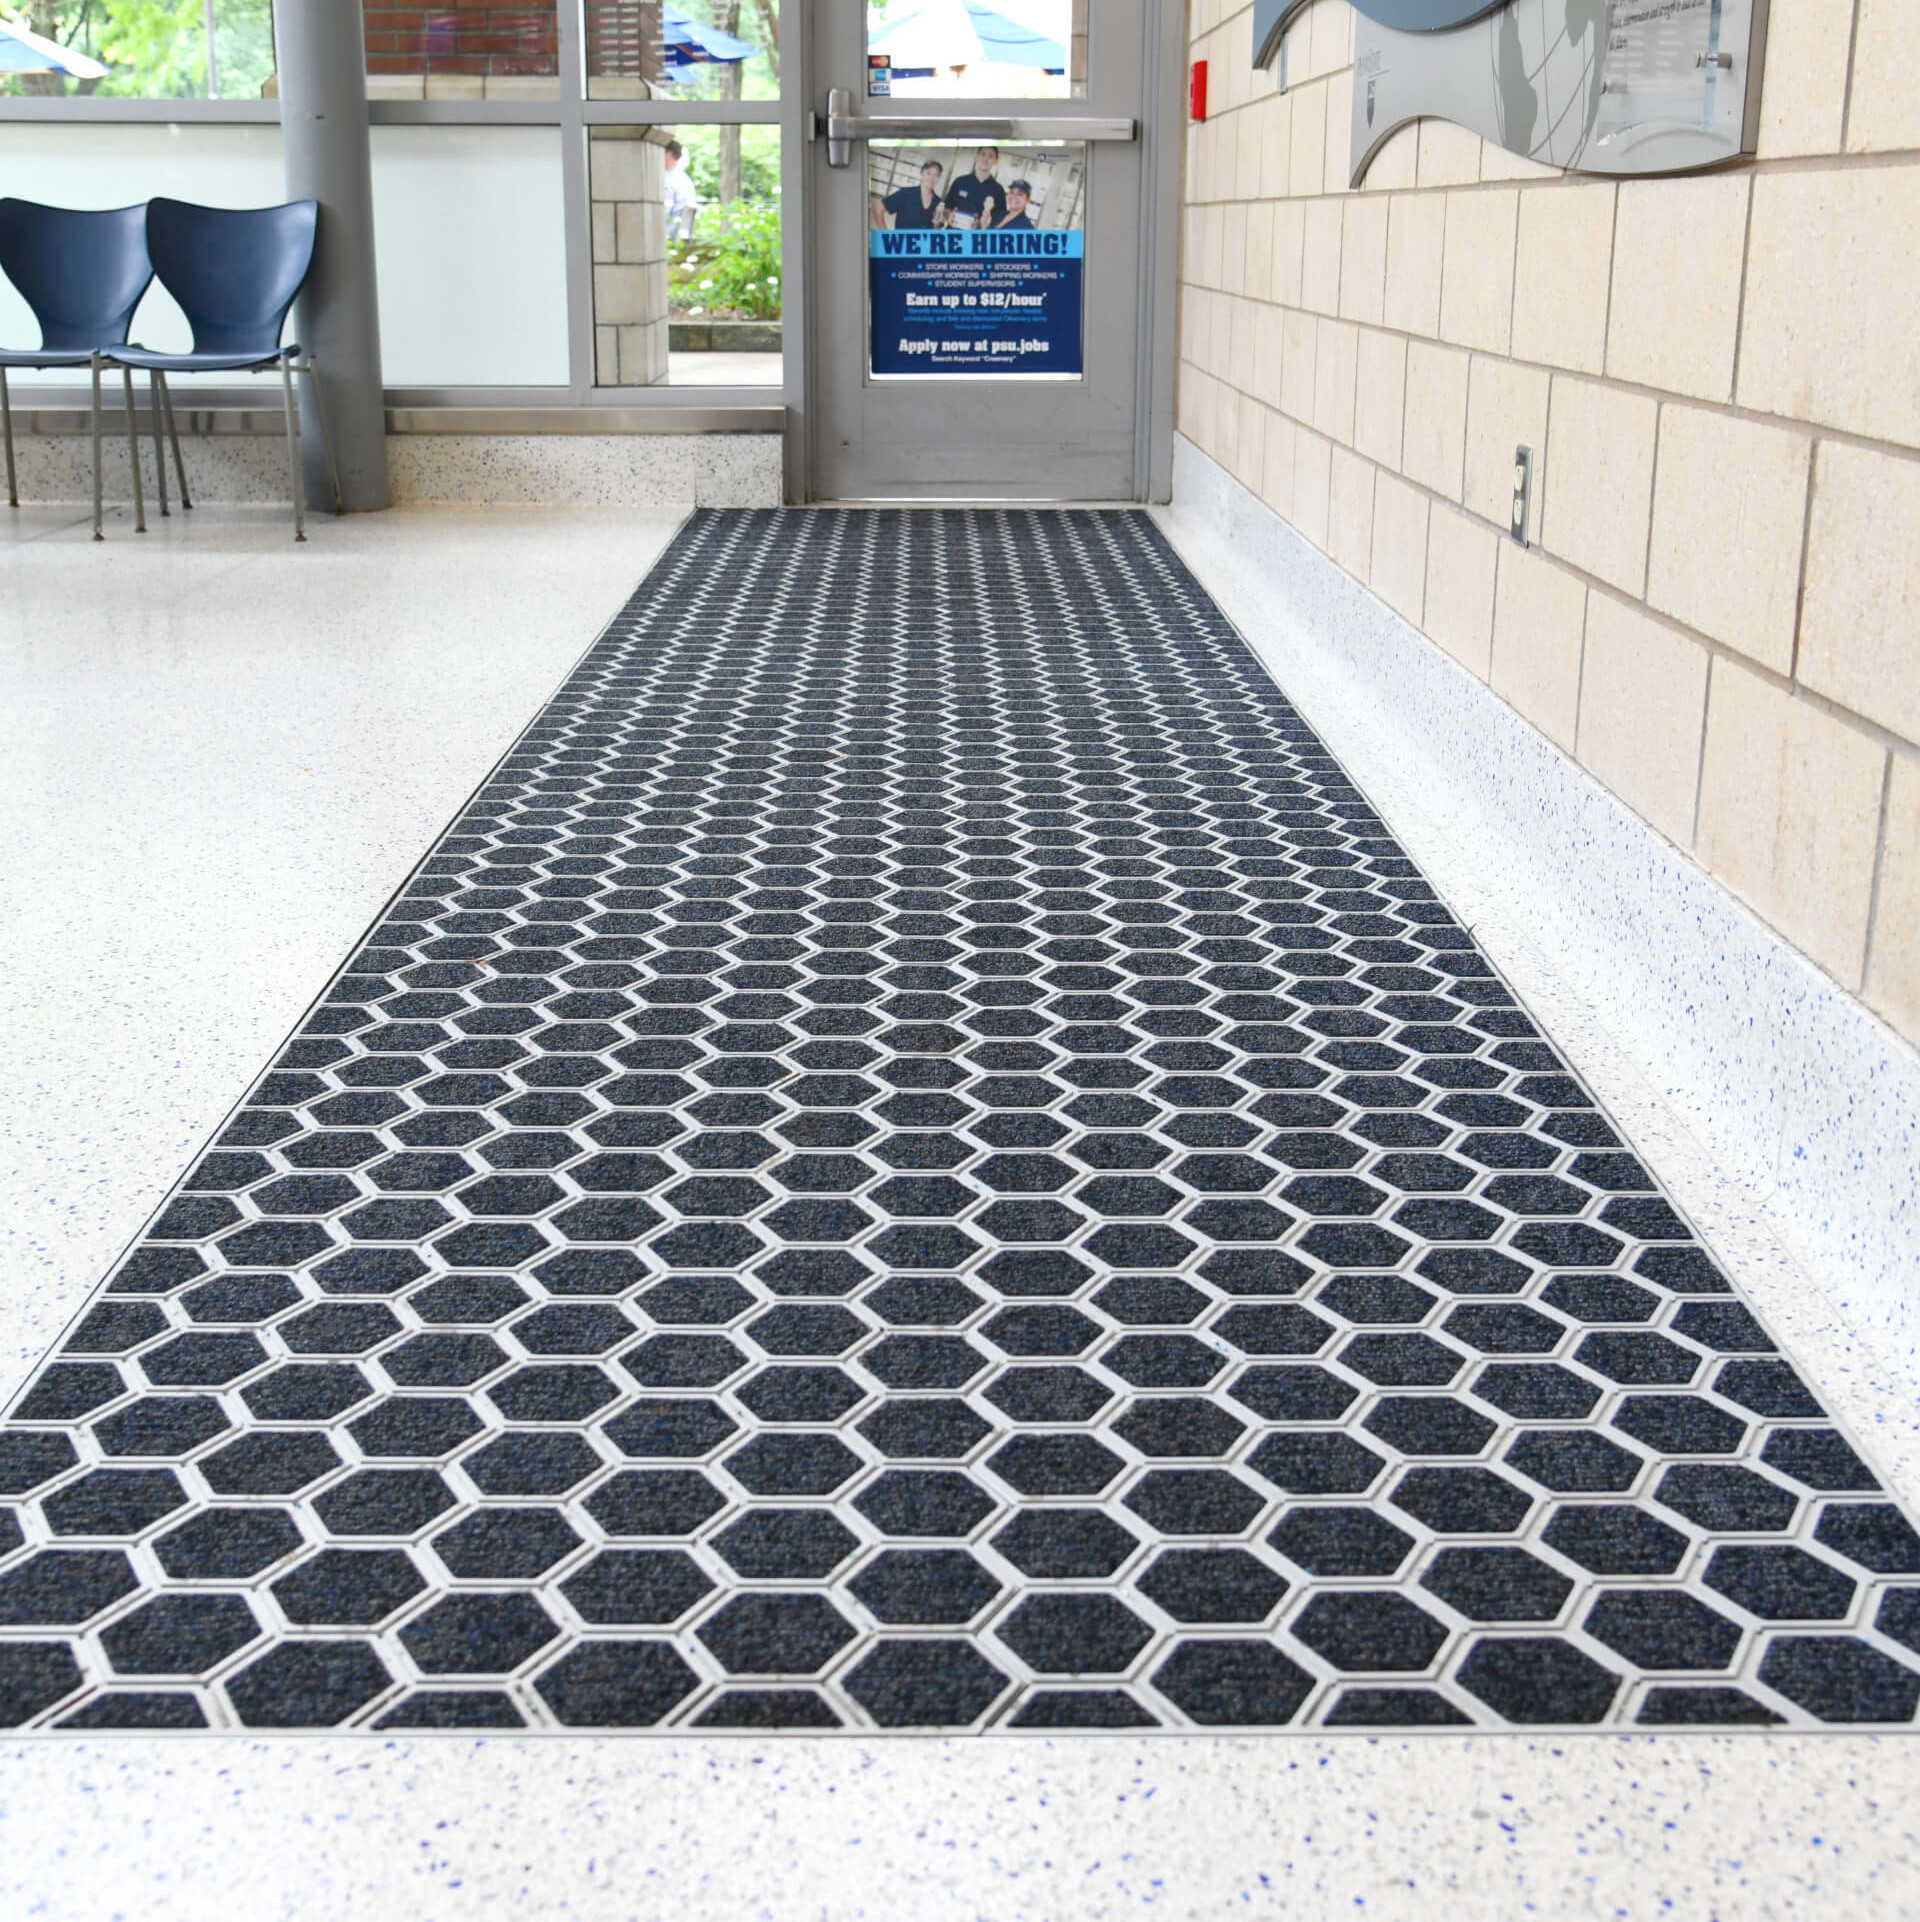 a built-in hexagonal rug at the entrance of a school building